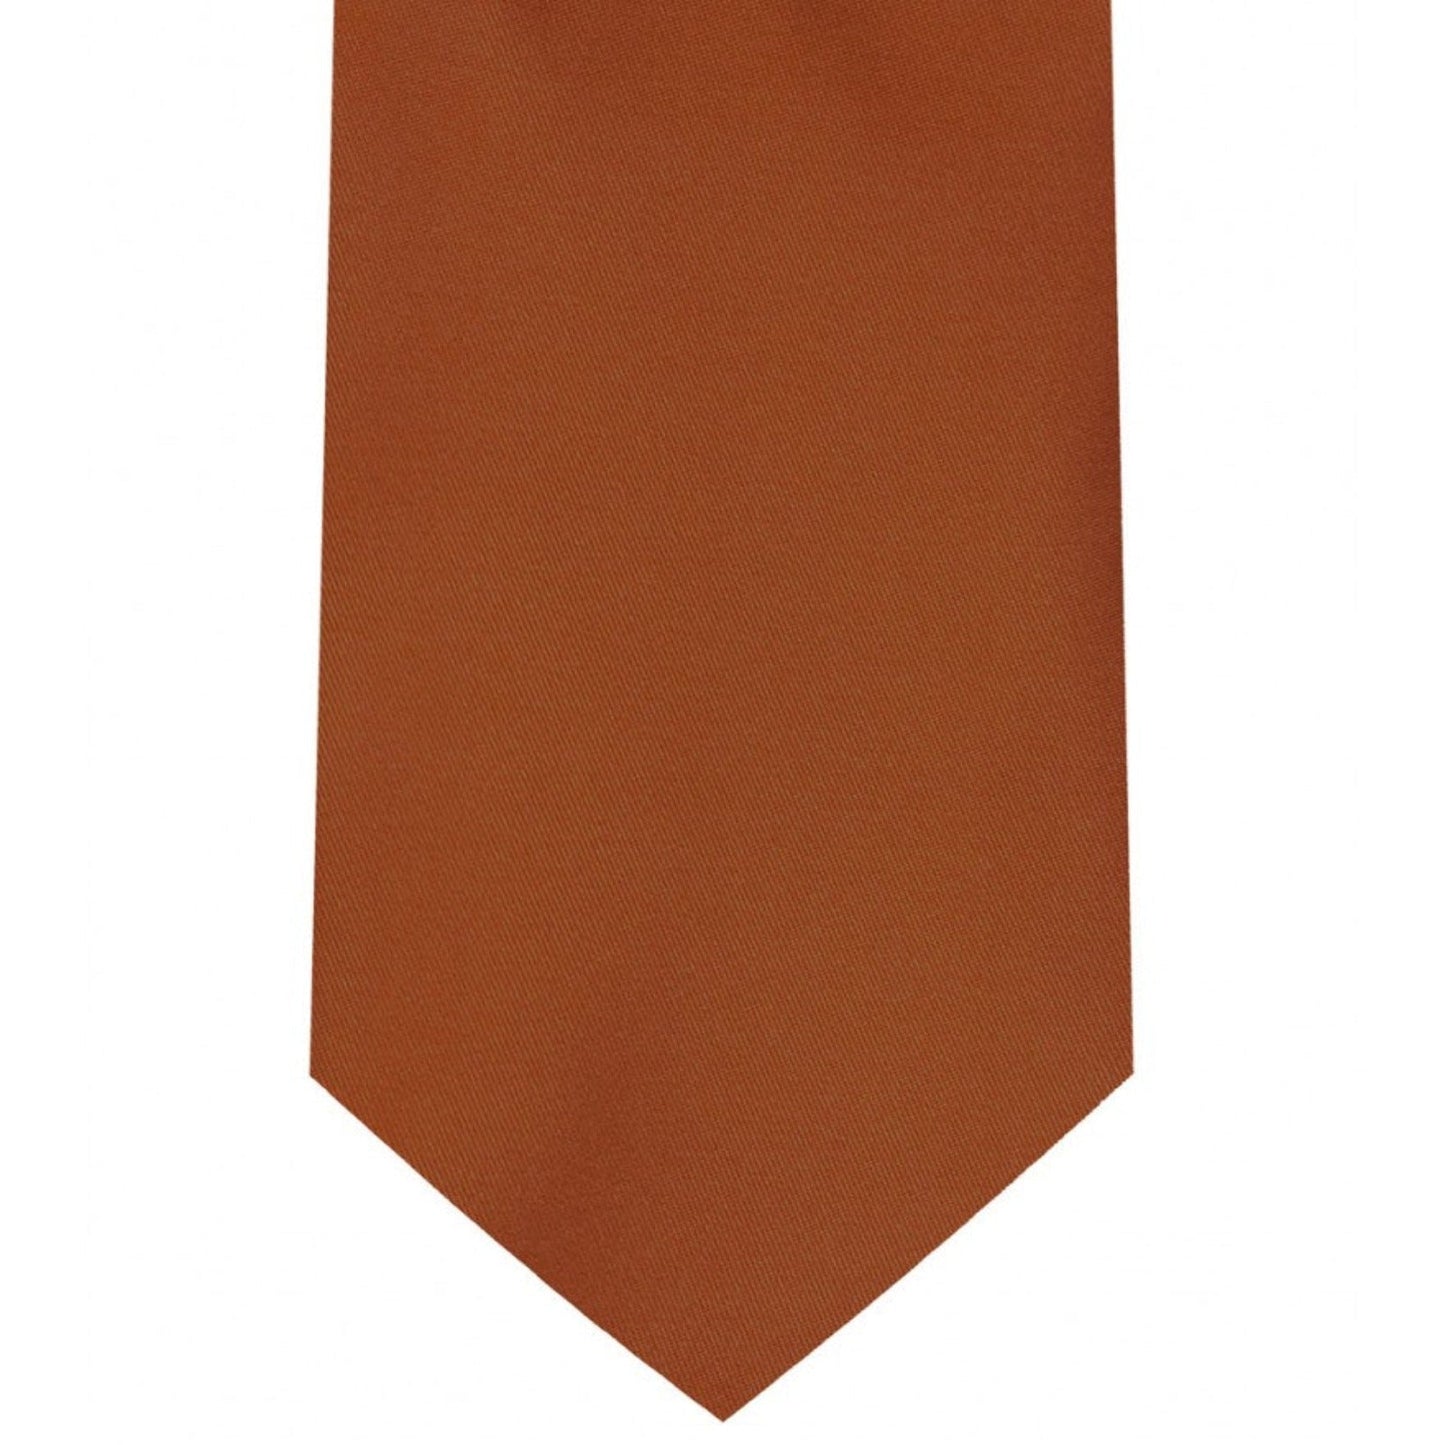 Classic Cinnamon Tie Regular width 3.5 inches With Matching Pocket Square | KCT Menswear